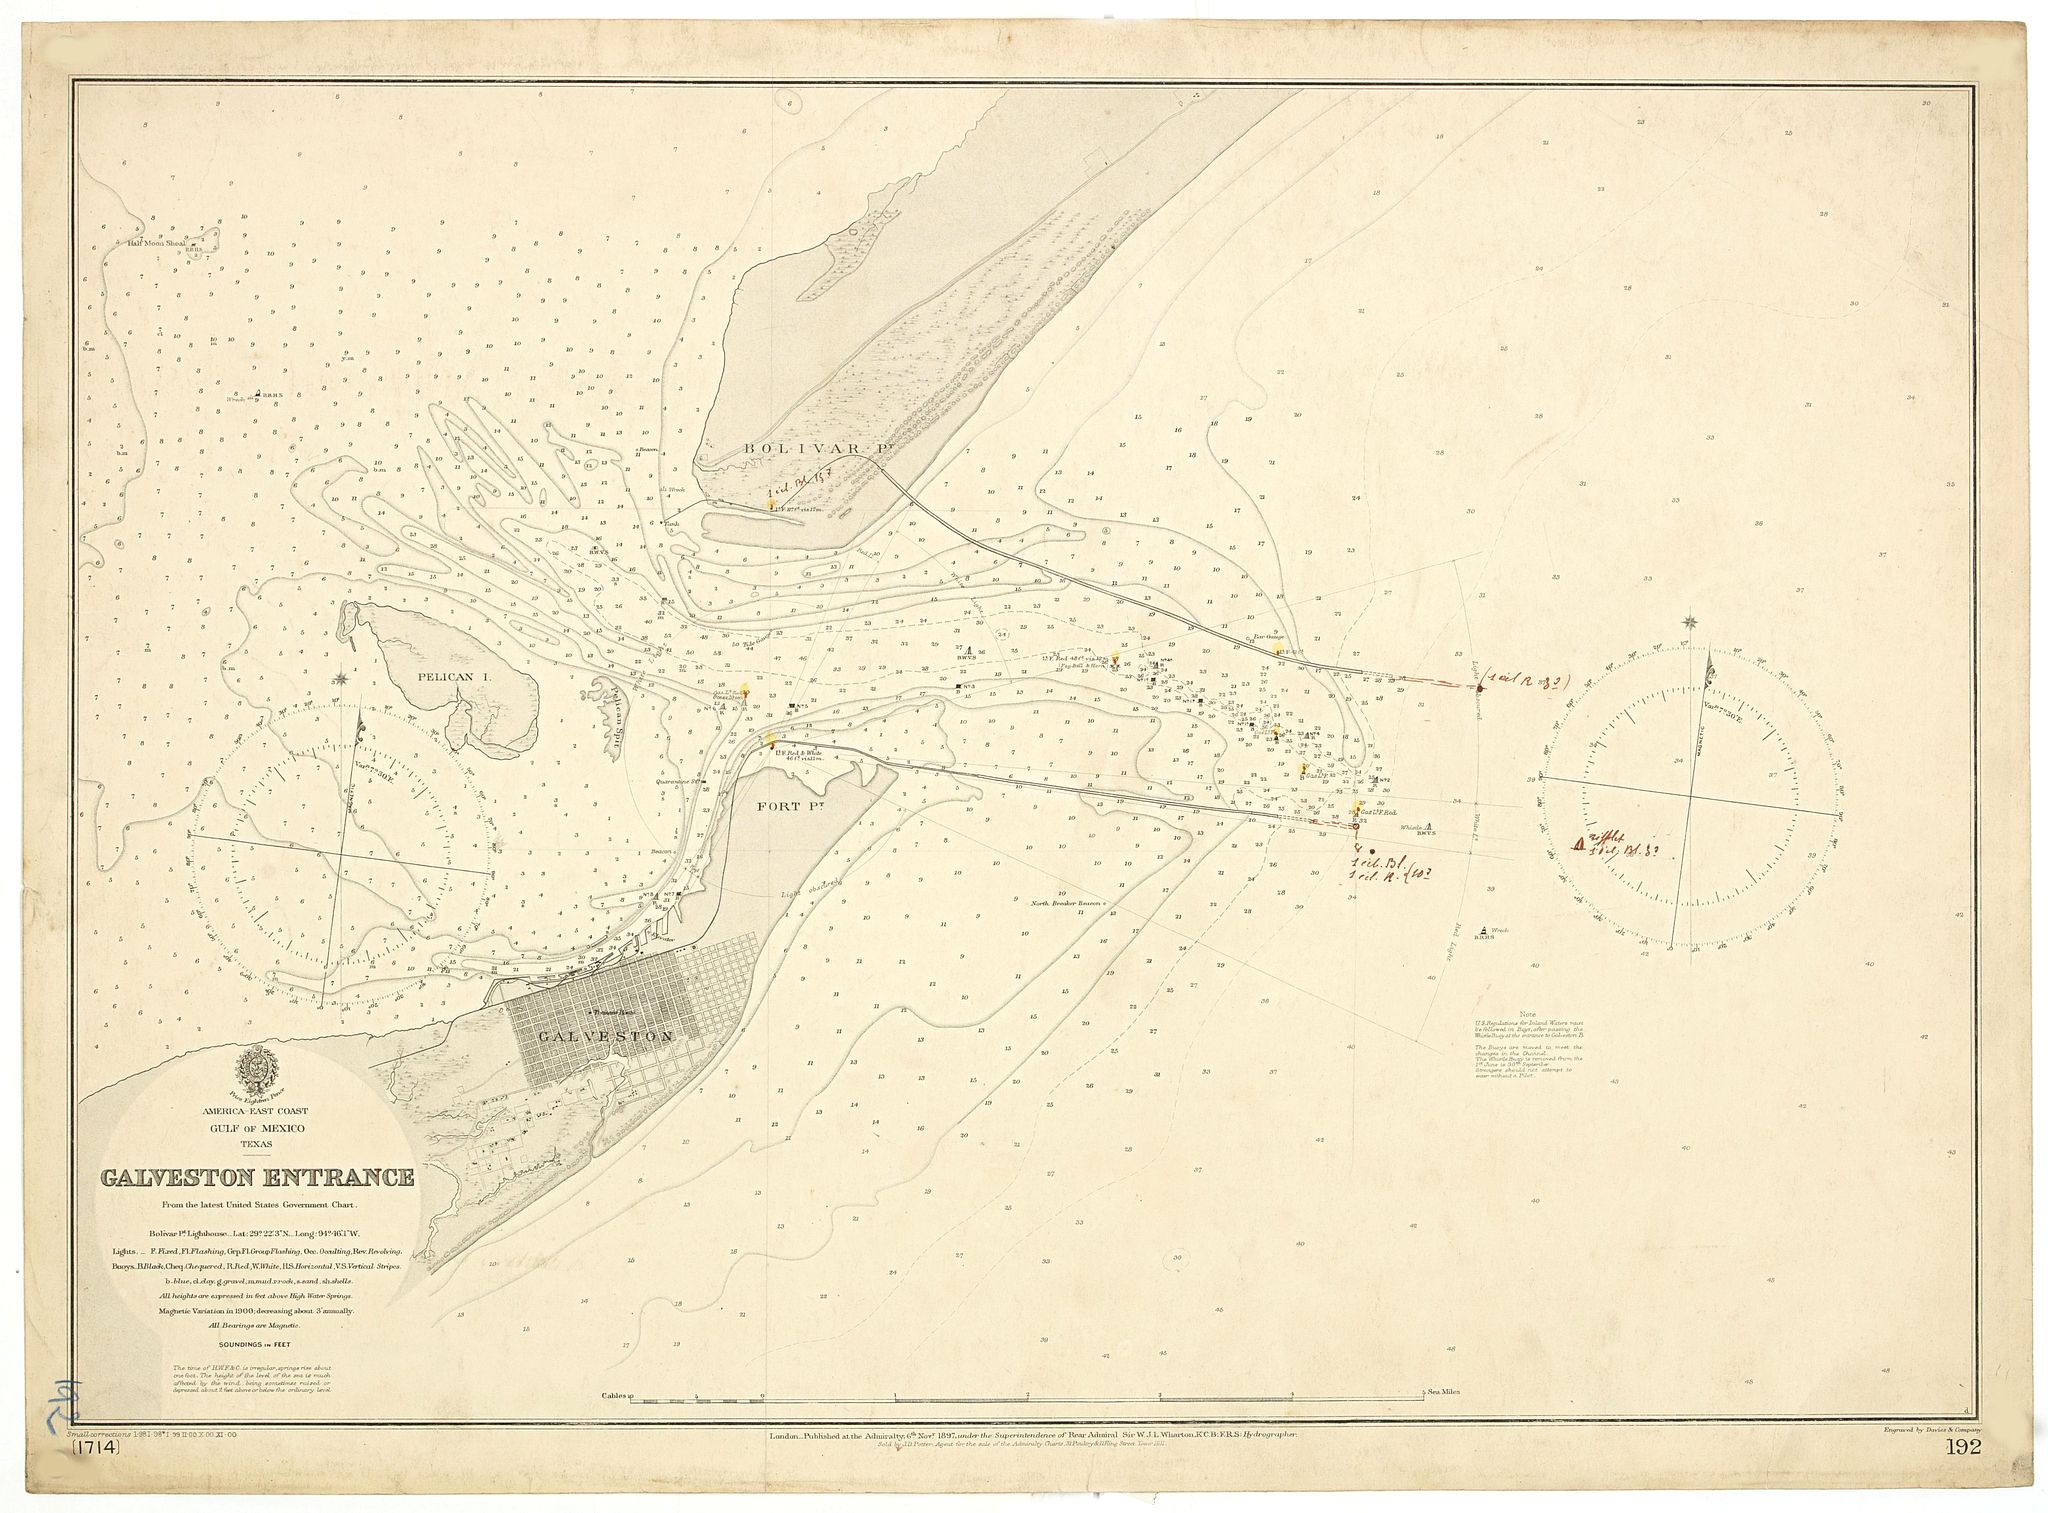 East Coast, Gulf of Mexico, Texas - Galveston Entrance from the latest United States Government Chart.